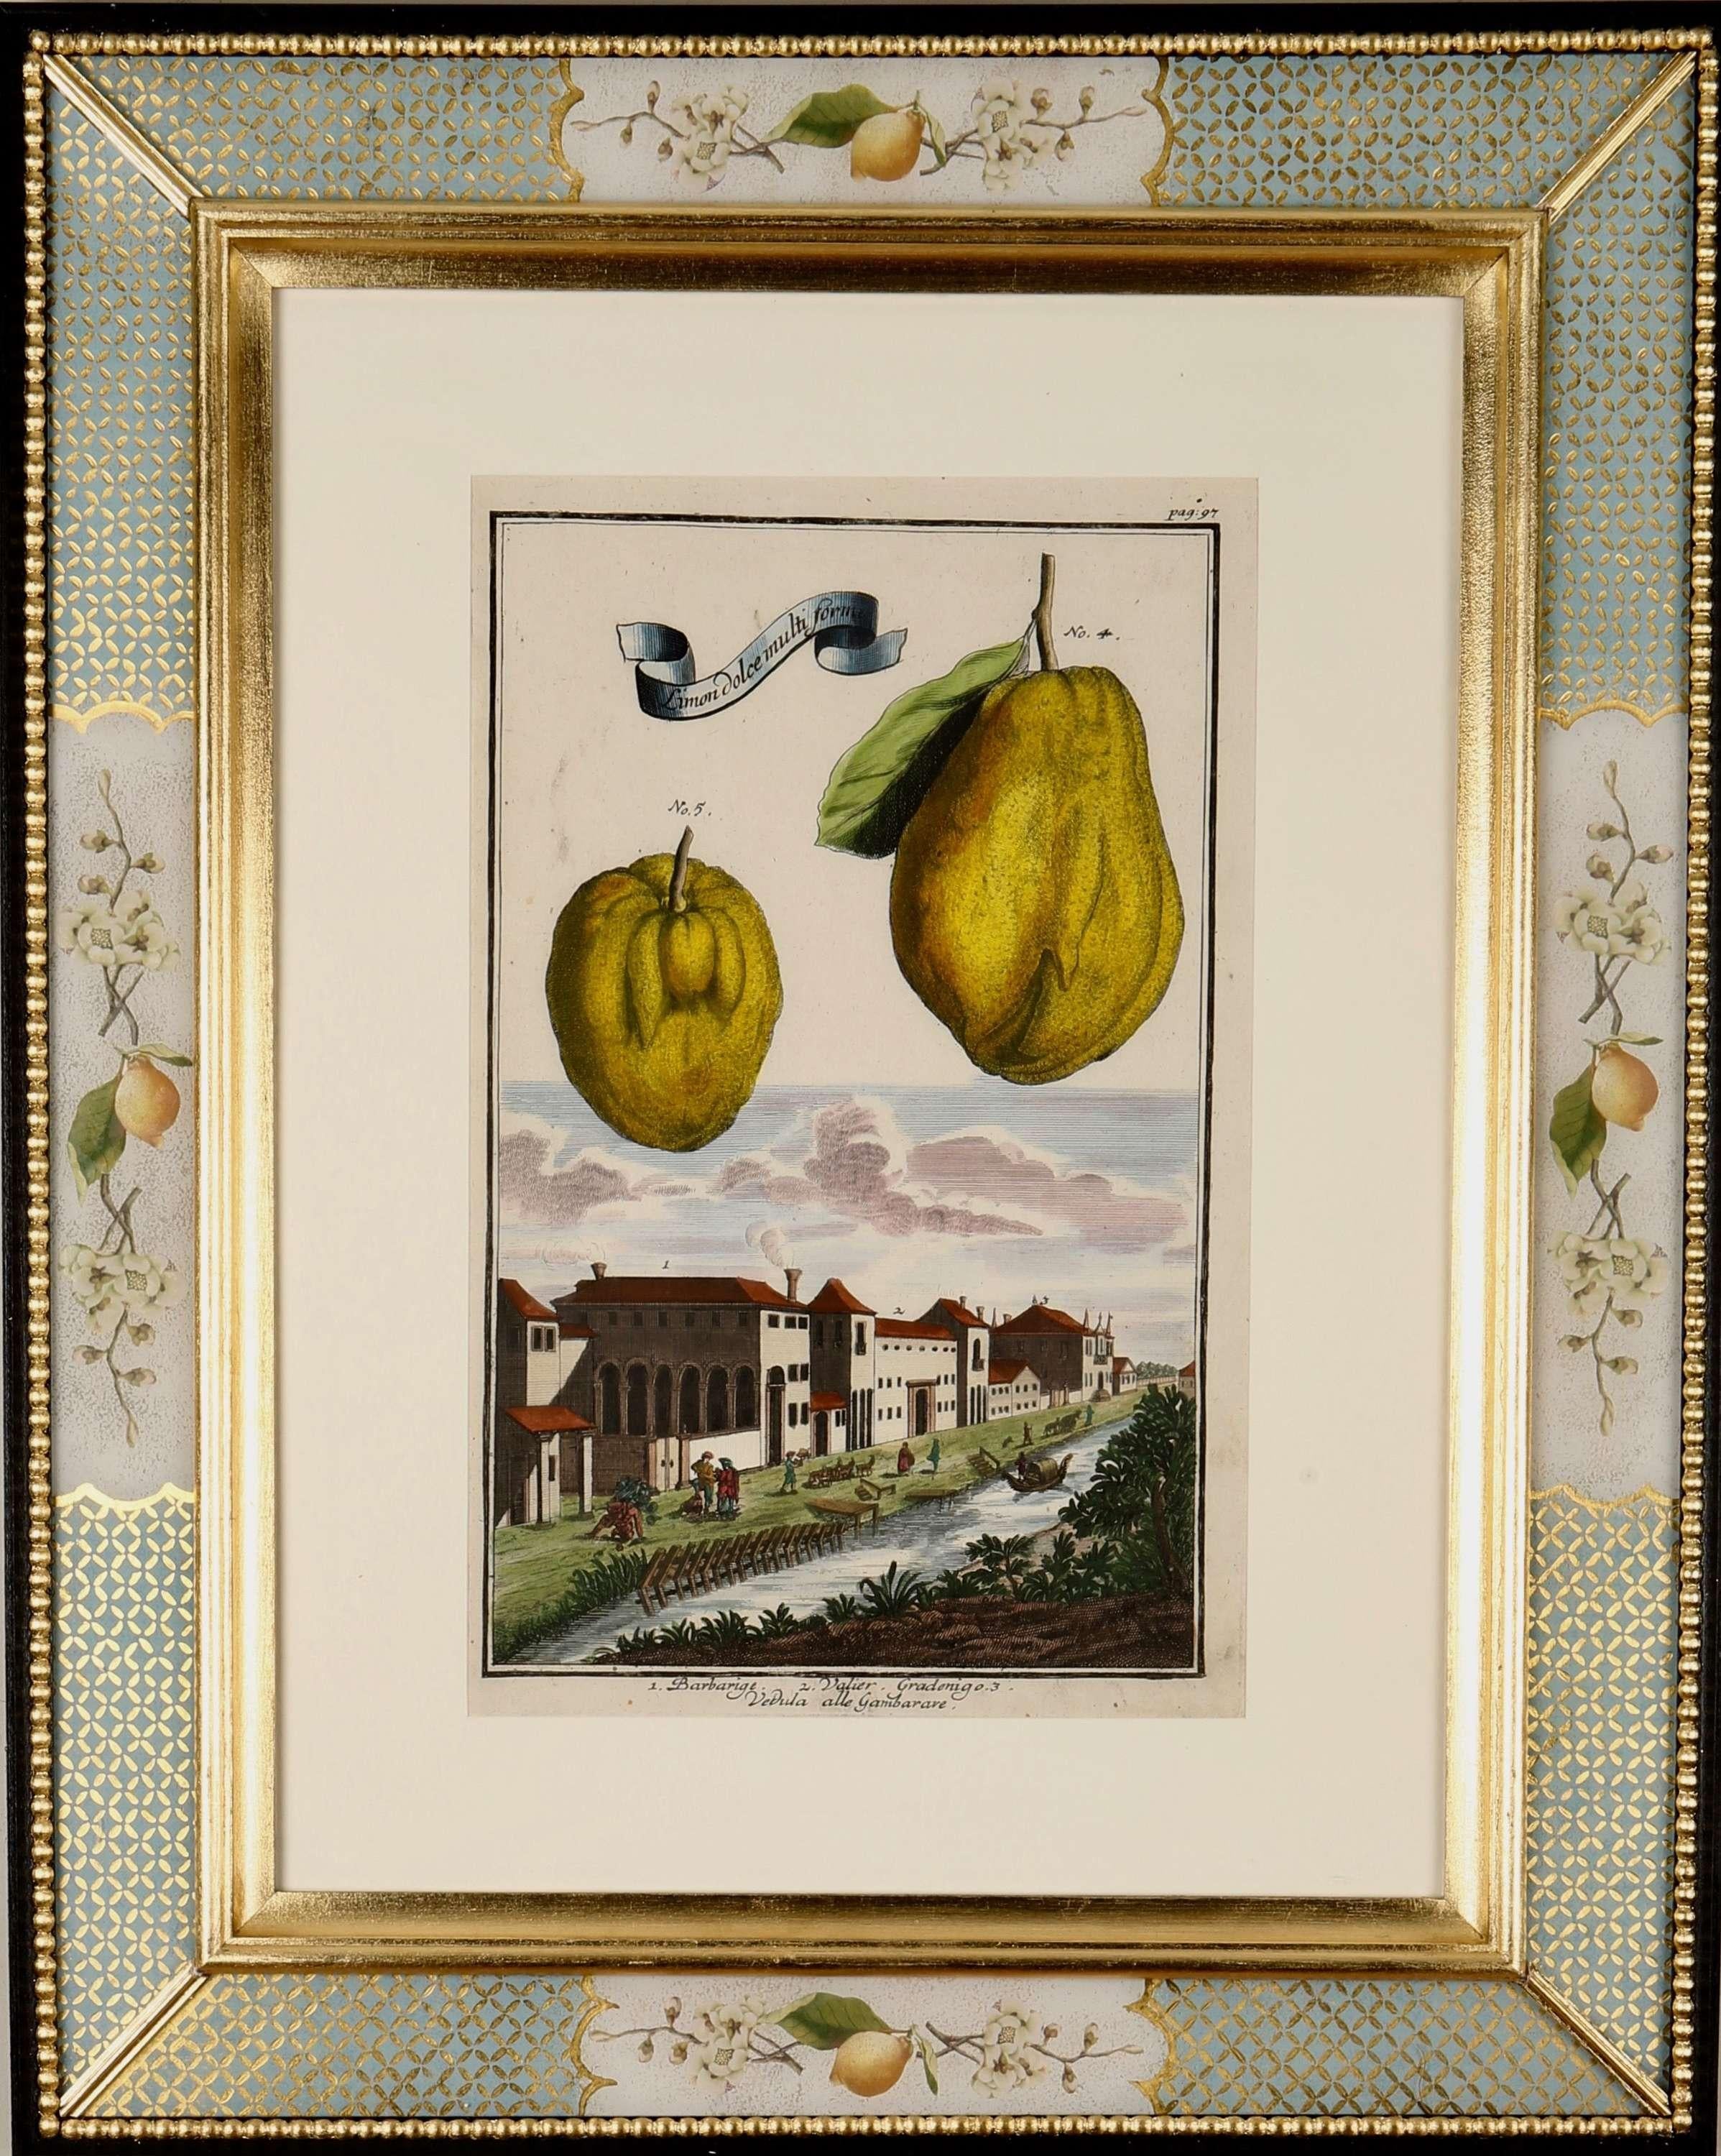 Fine hand-coloured engravings of citrus fruits from the ""Nurnbergisch Hesperides"", published by Johannes Volckamer 1708-14, presented in our exclusive decalcomania frames with 23ct gold leaf trellis-work corners.

In the late seventeenth century